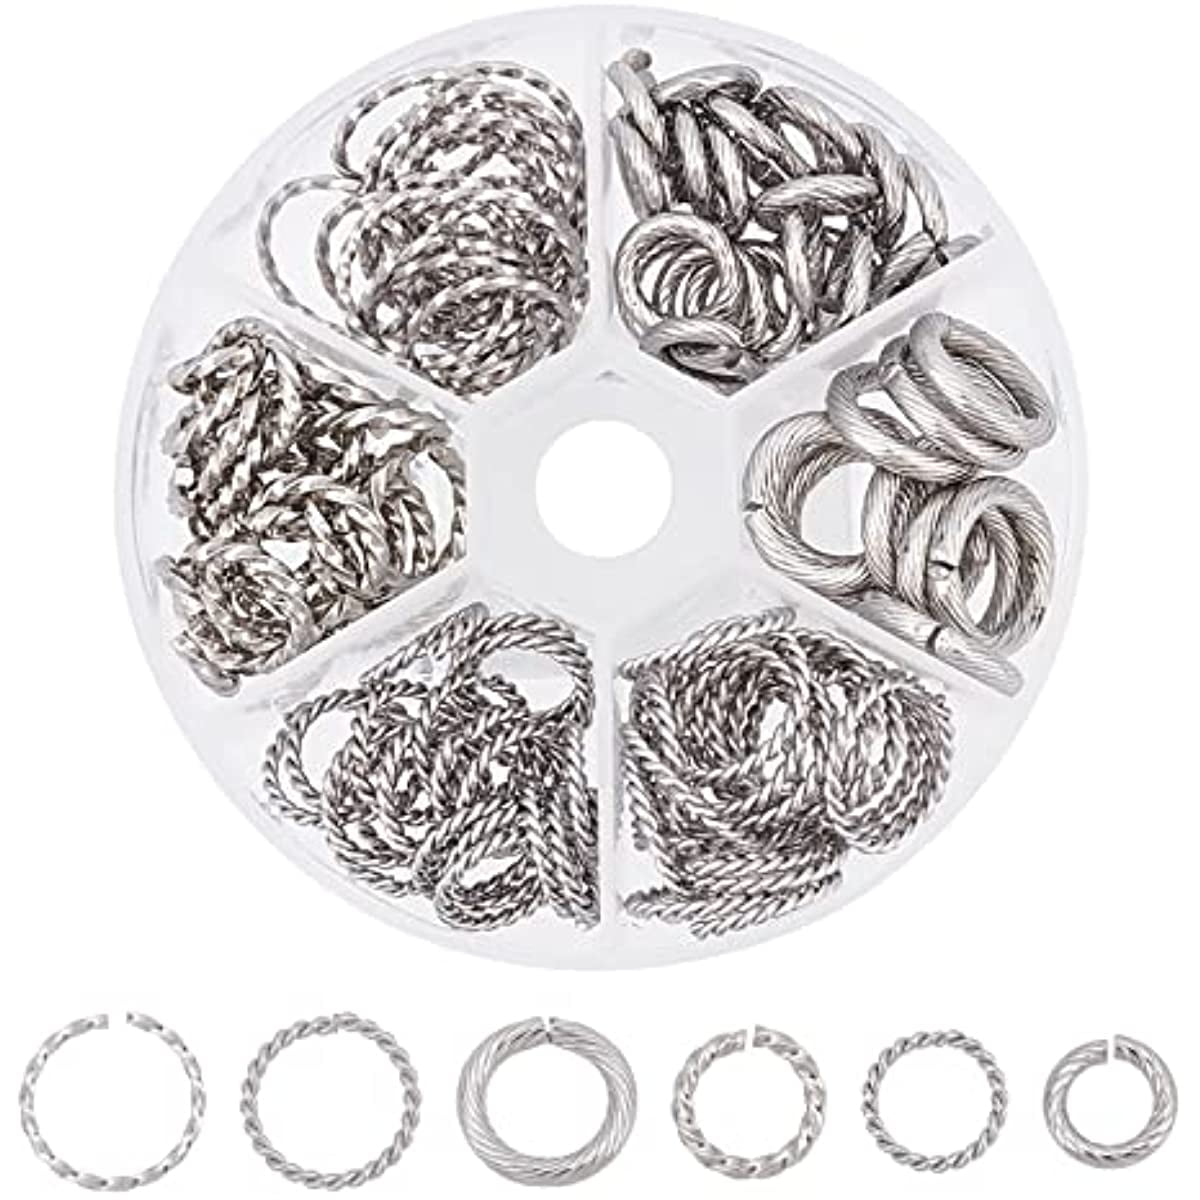 50/100pcs/lot 5-15mm Stainless Steel Open Double Jump Rings for DIY Key Double Split Rings Connectors for Jewelry Making (Color : Stainless Steel